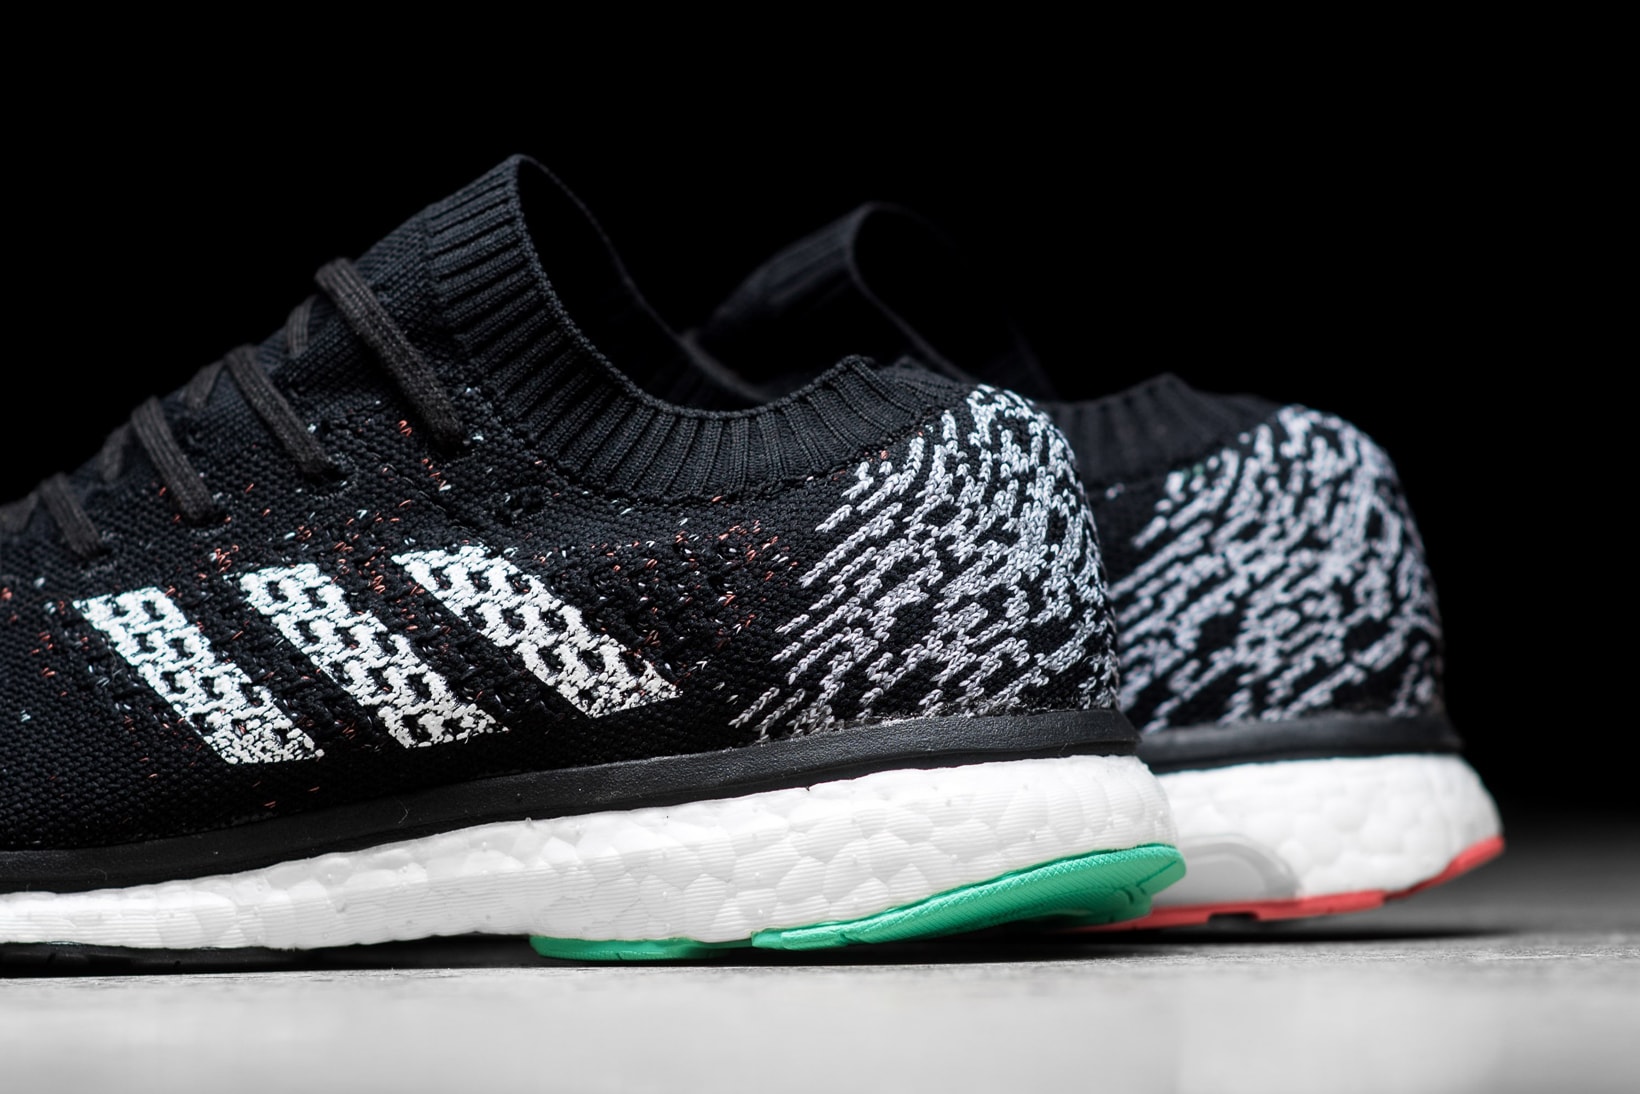 adidas Reintroduces adizero Prime Knit BOOST LTD Black Green Pink White Accents Mens Shoes Sneakers Performance Running Training Work-out Endurance